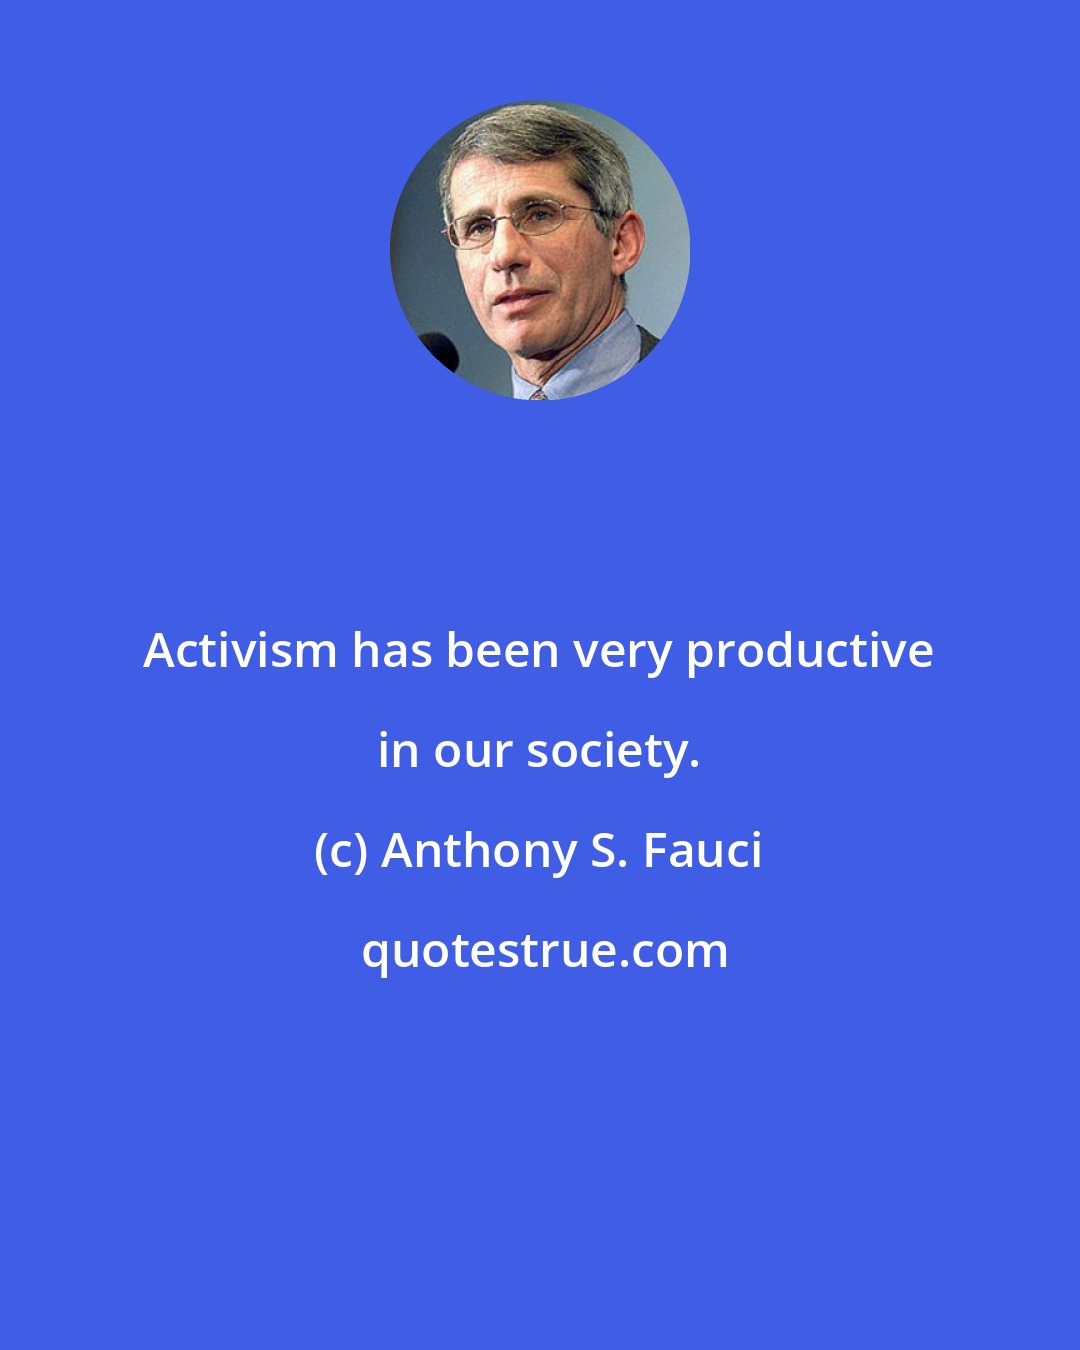 Anthony S. Fauci: Activism has been very productive in our society.